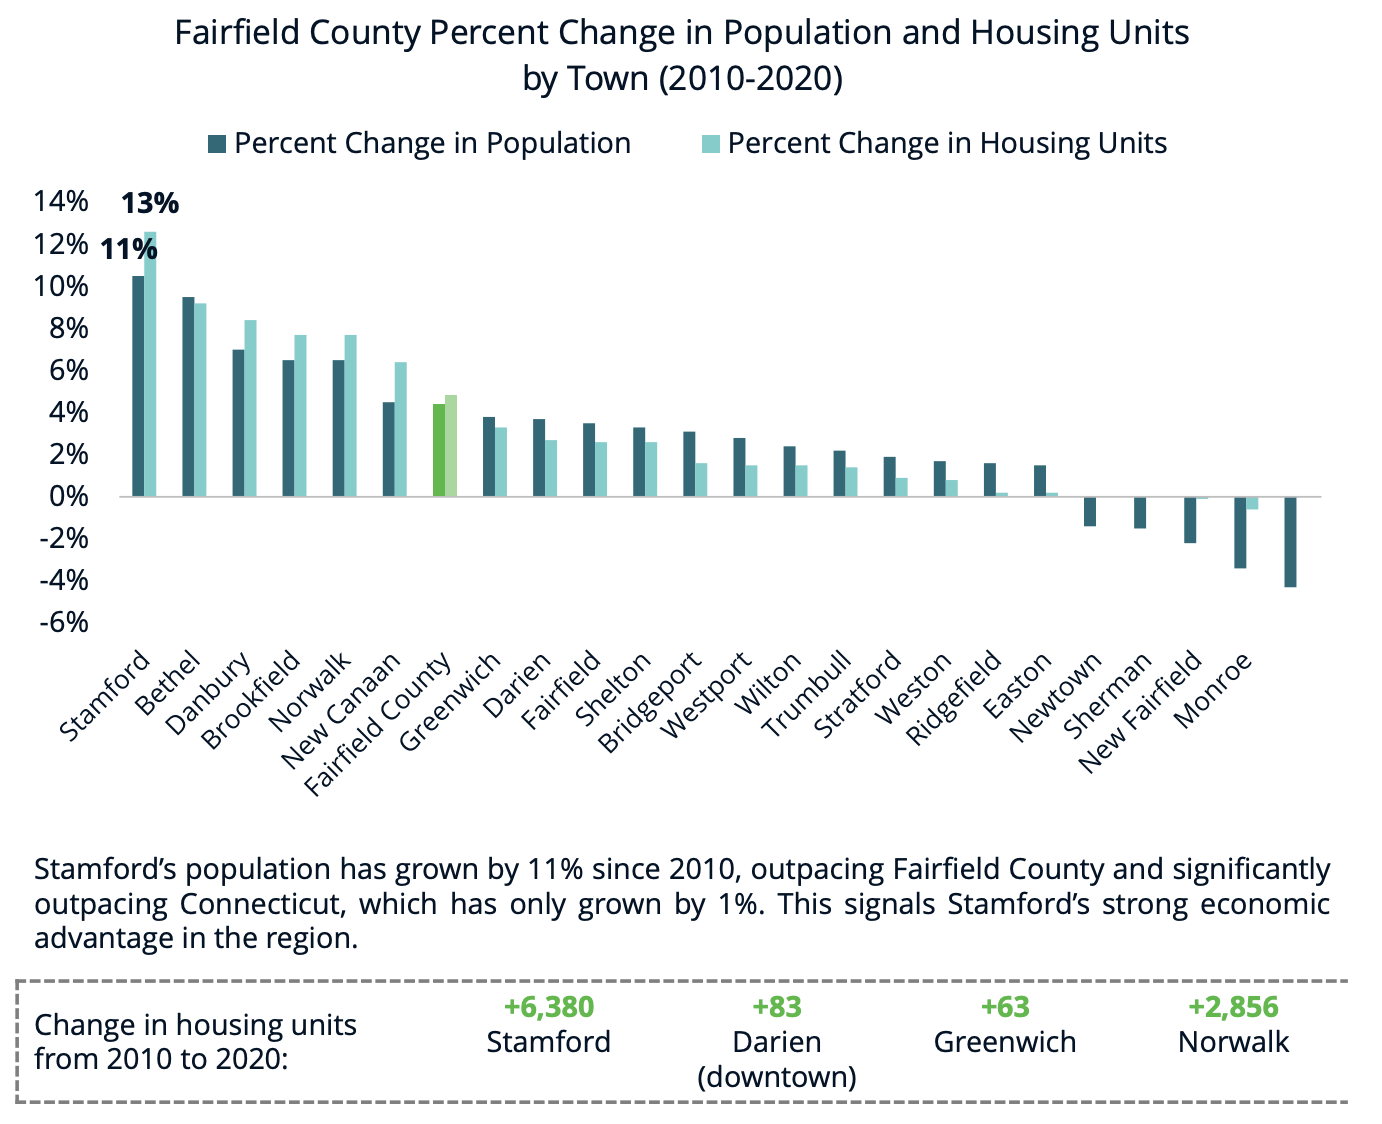 Chart shows population growth in Fairfield County